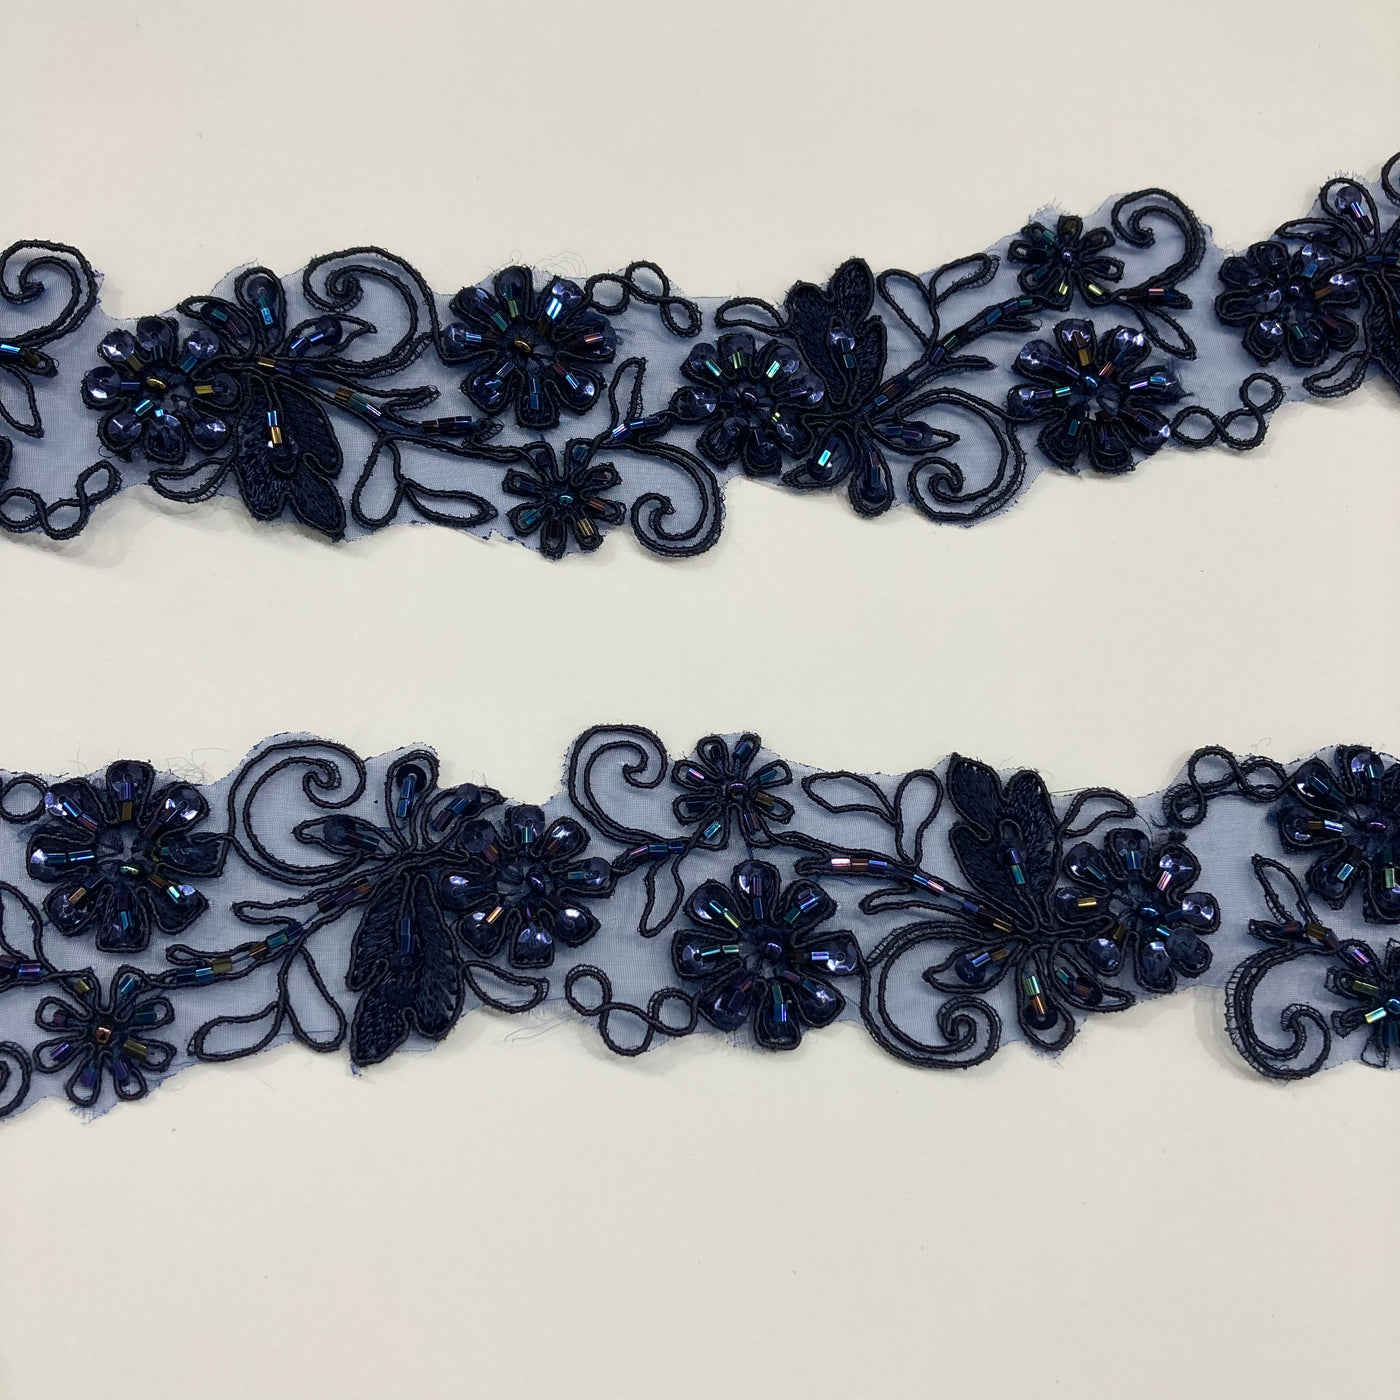 Beaded, Corded & Embroidered Navy Trimming. Lace Usa